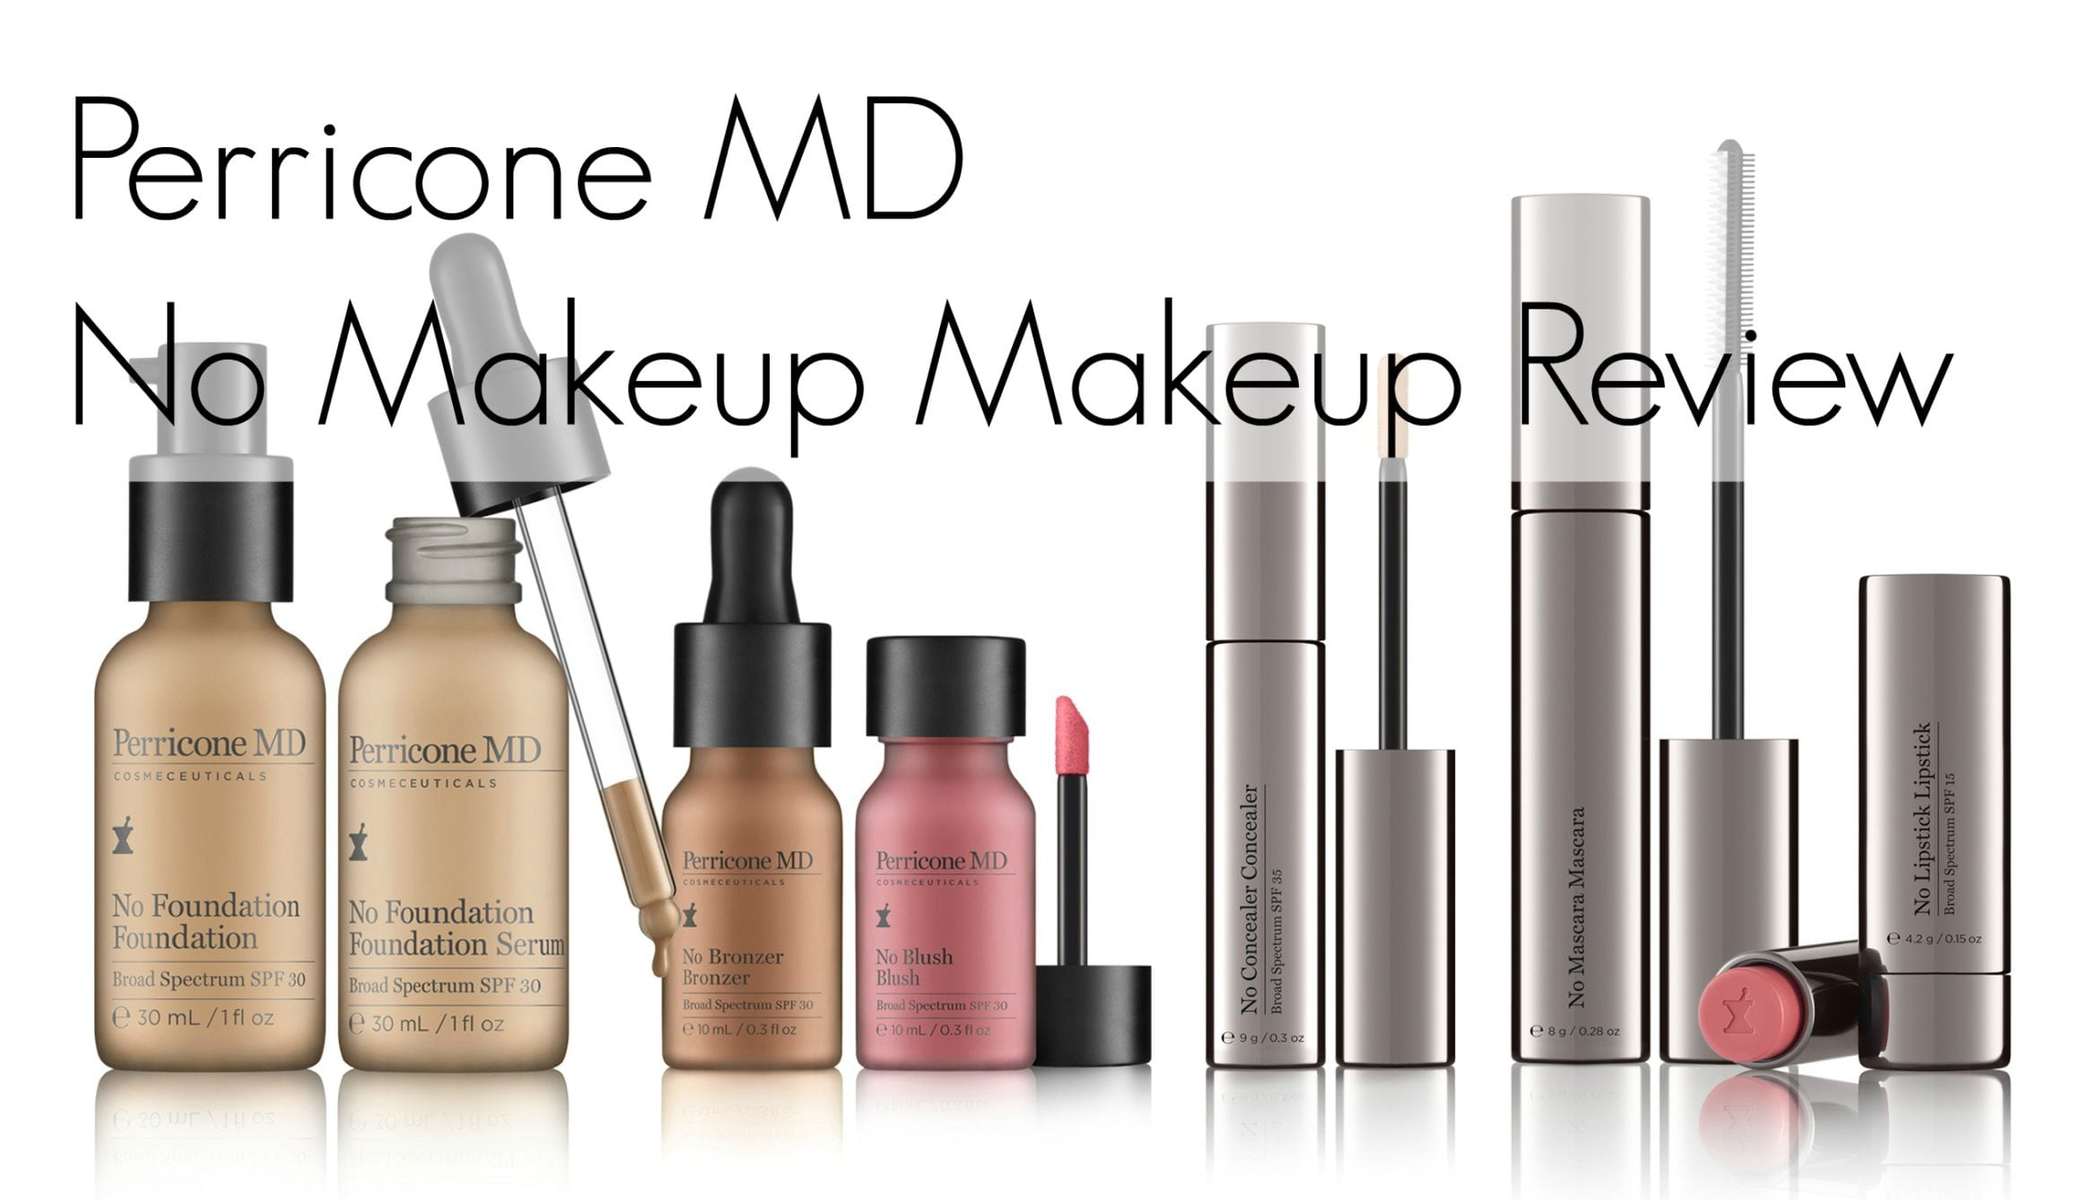 Over 40 Beauty Review: Perricone MD No Makeup Makeup Line